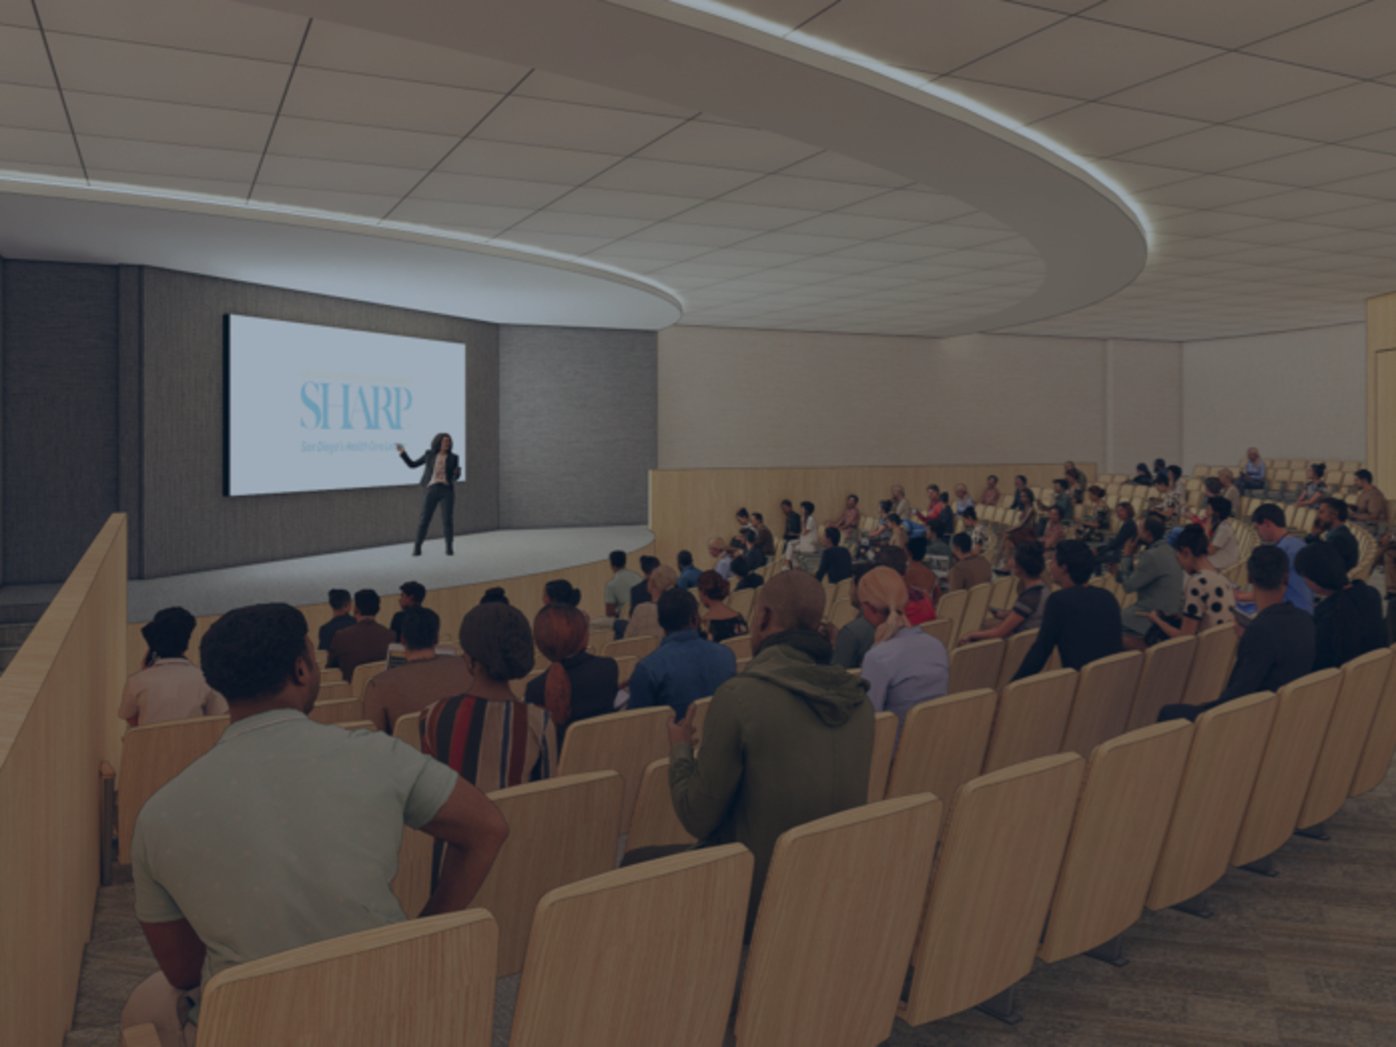 Artist rendering of auditorium with audience seated and presenter on stage